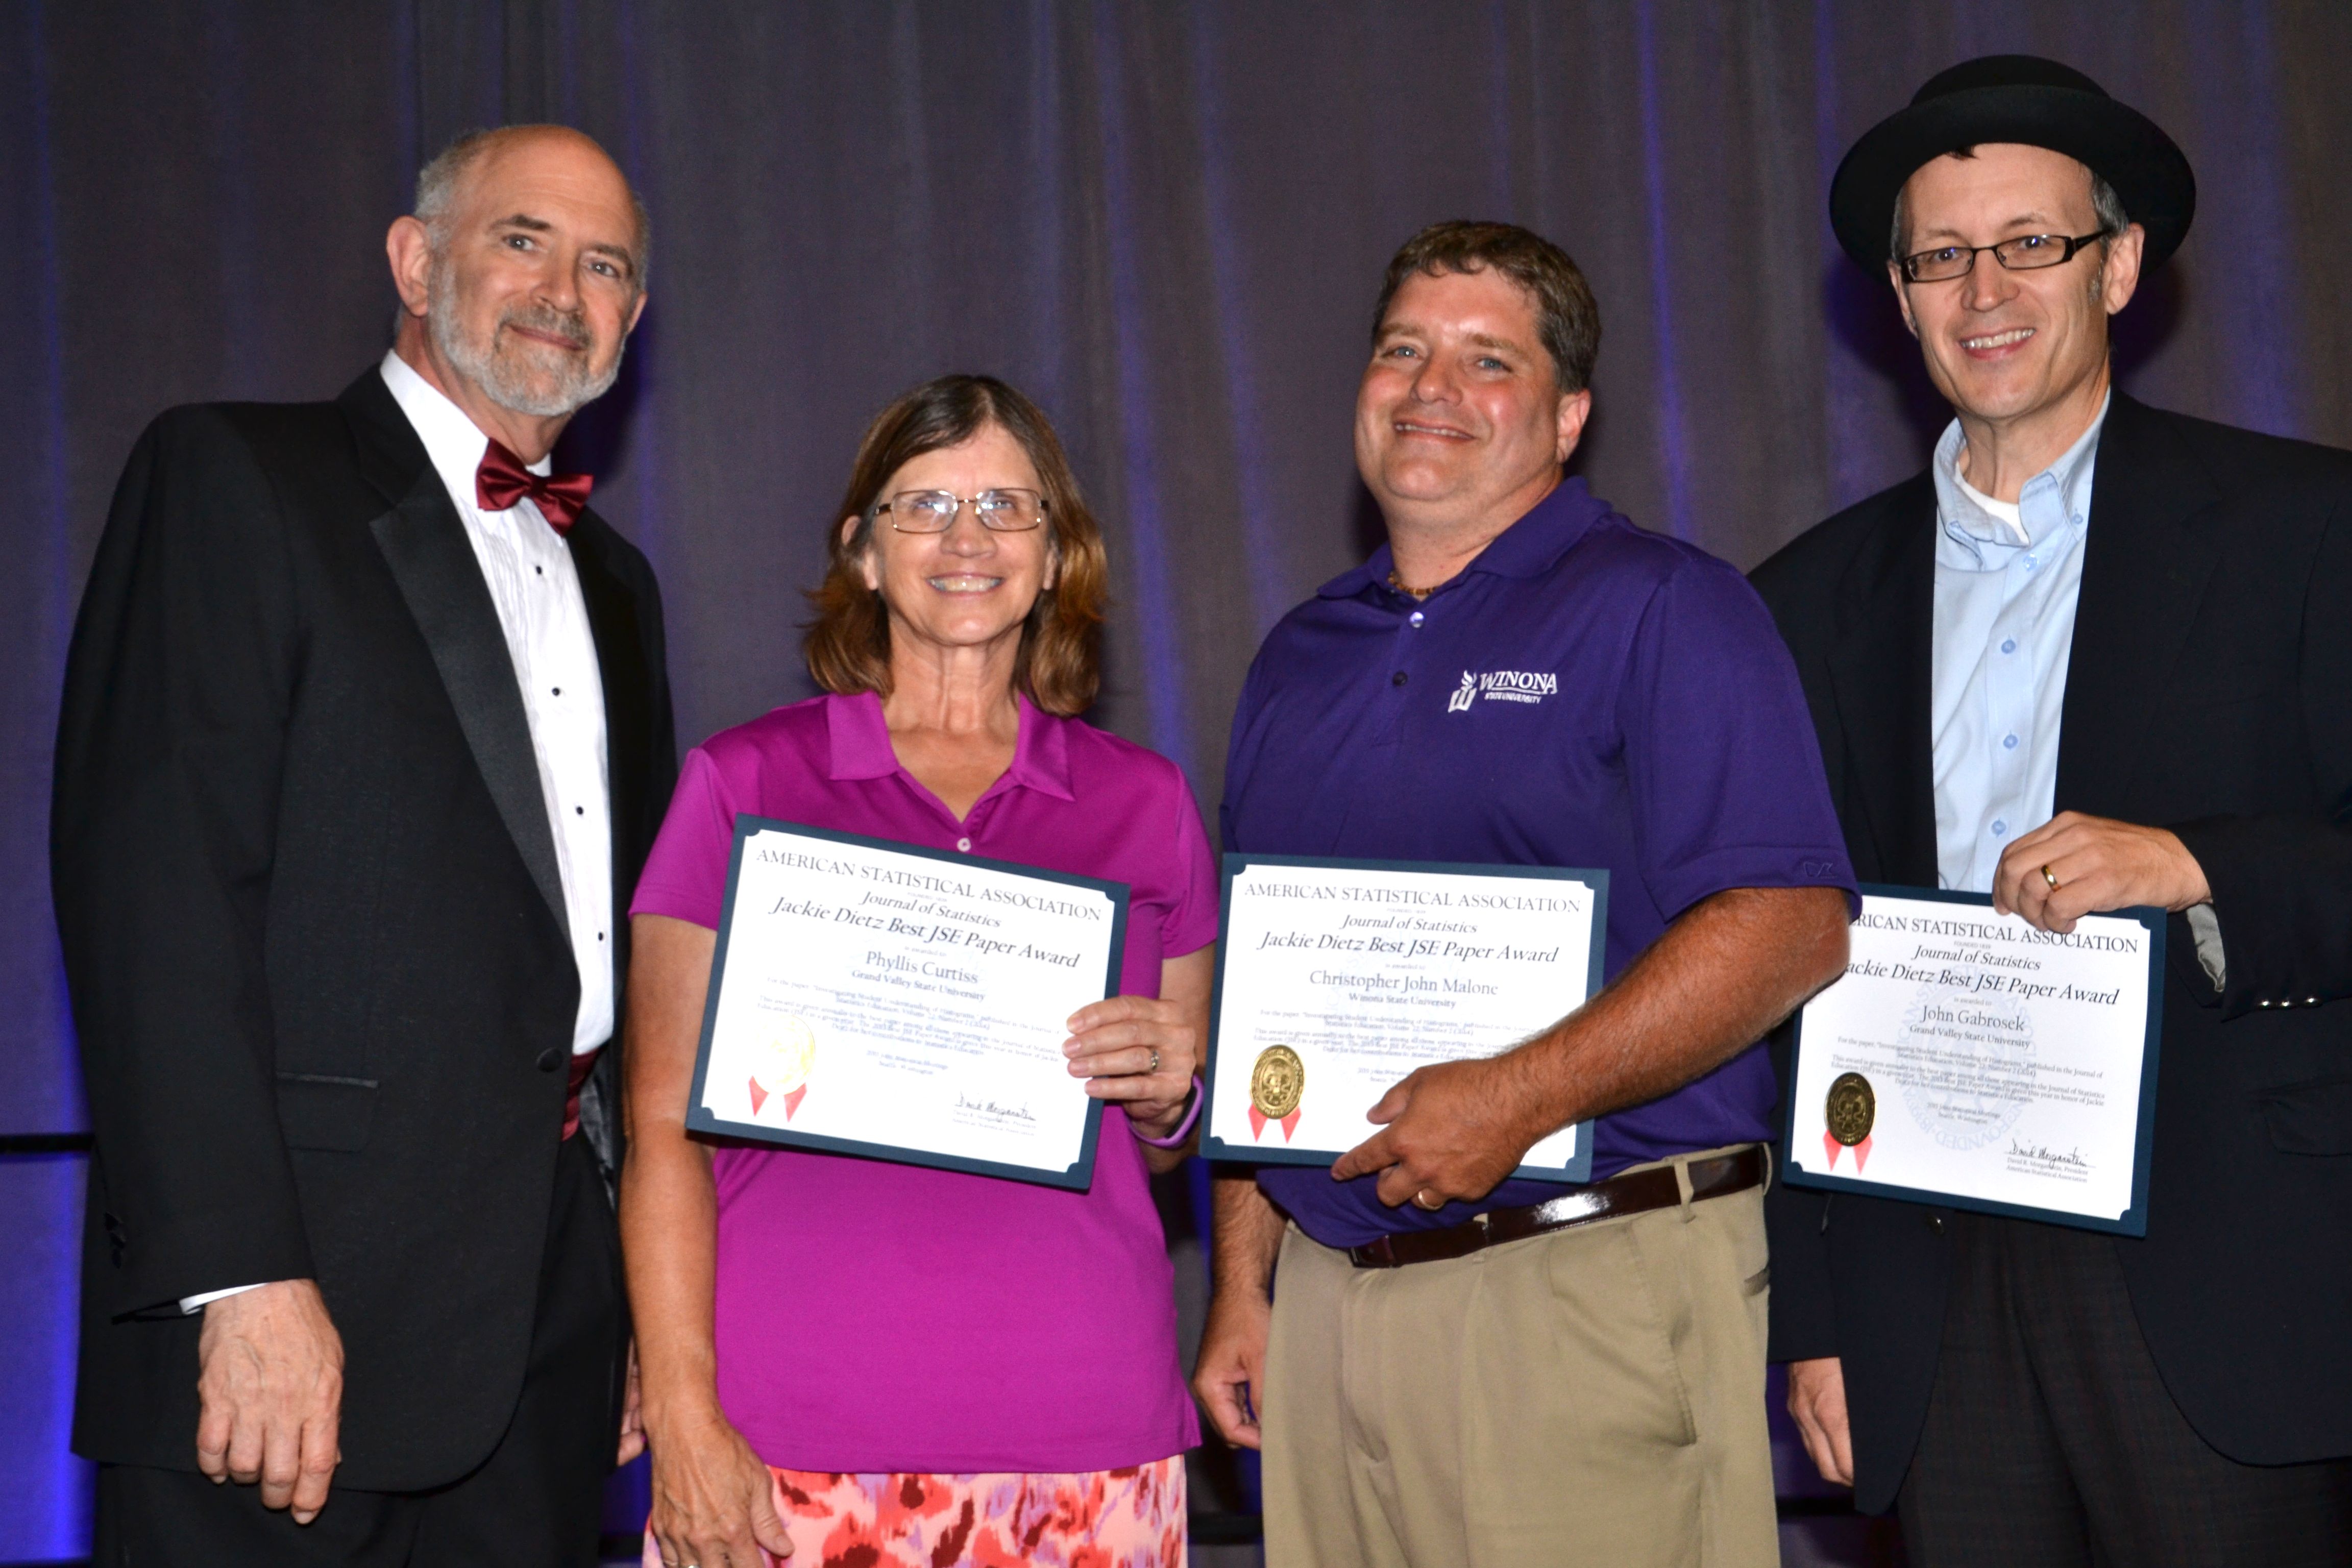 ASA President David Morganstein with the winners of the Jackie Dietz Best <em>Journal of Statistics Education</em> Paper Award: Phyllis Curtiss of Grand Valley State University, Christopher John Malone of Winona State University, and John Gabrosek of Grand Valley State University